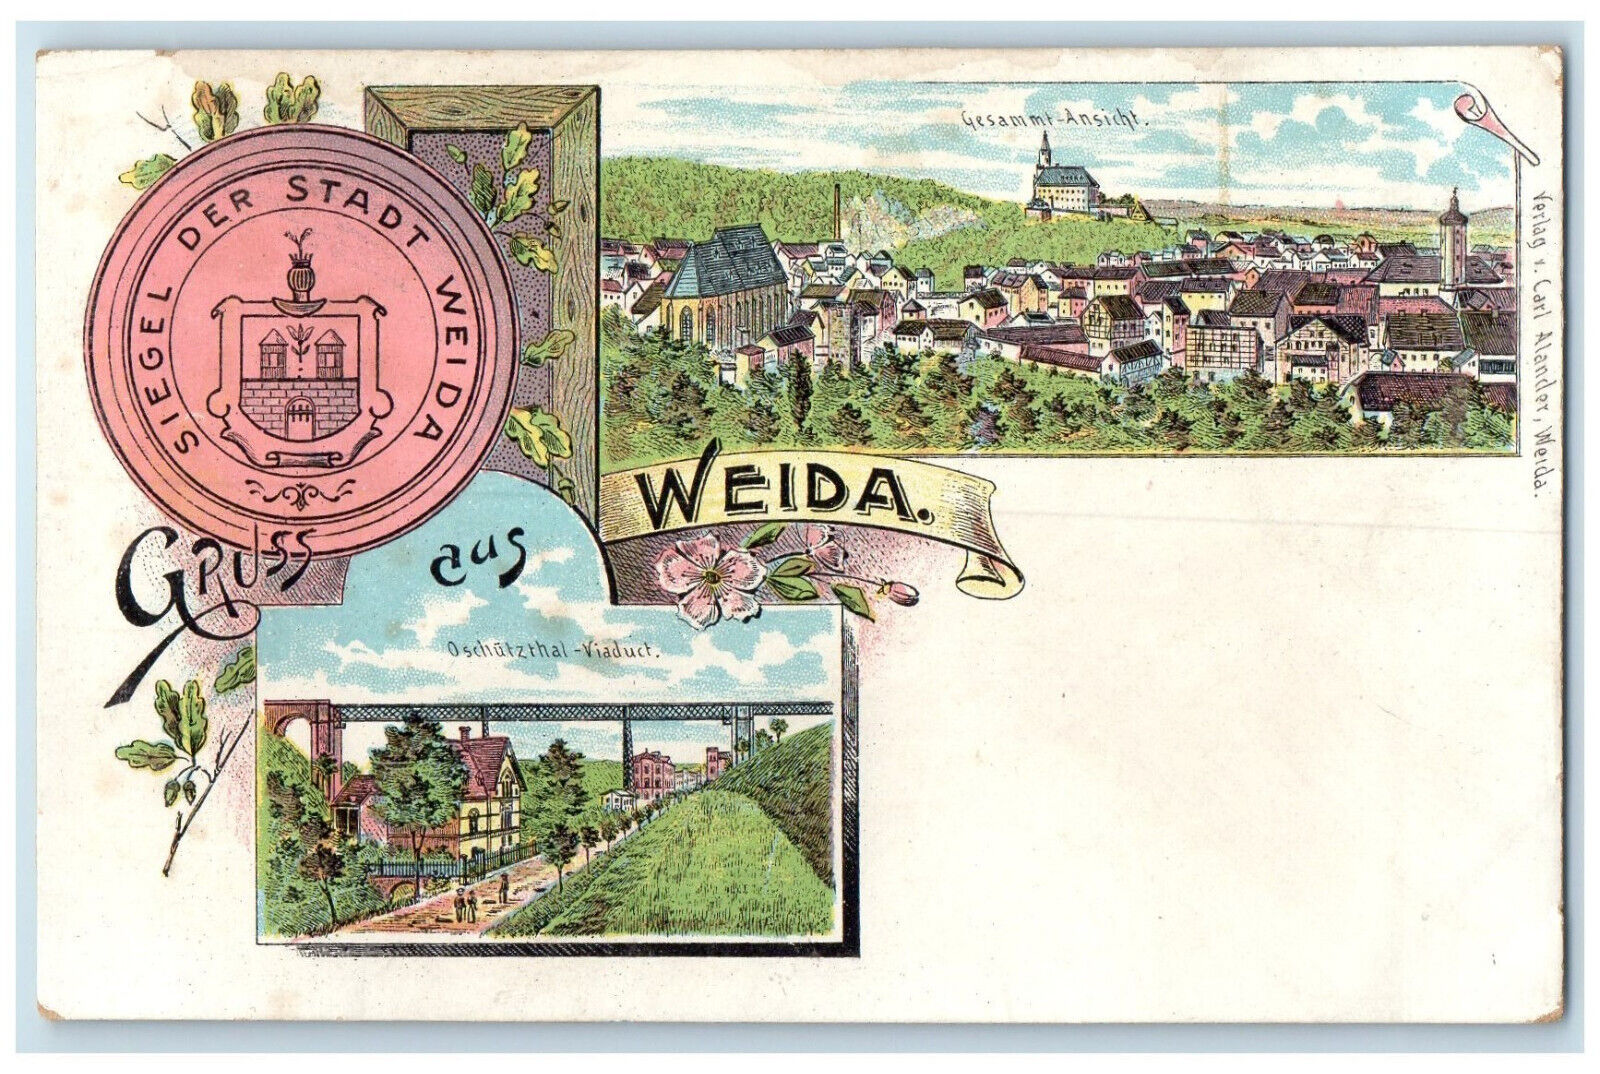 c1905 Greetings from Weida City Seal of Weida Germany Multiview Postcard